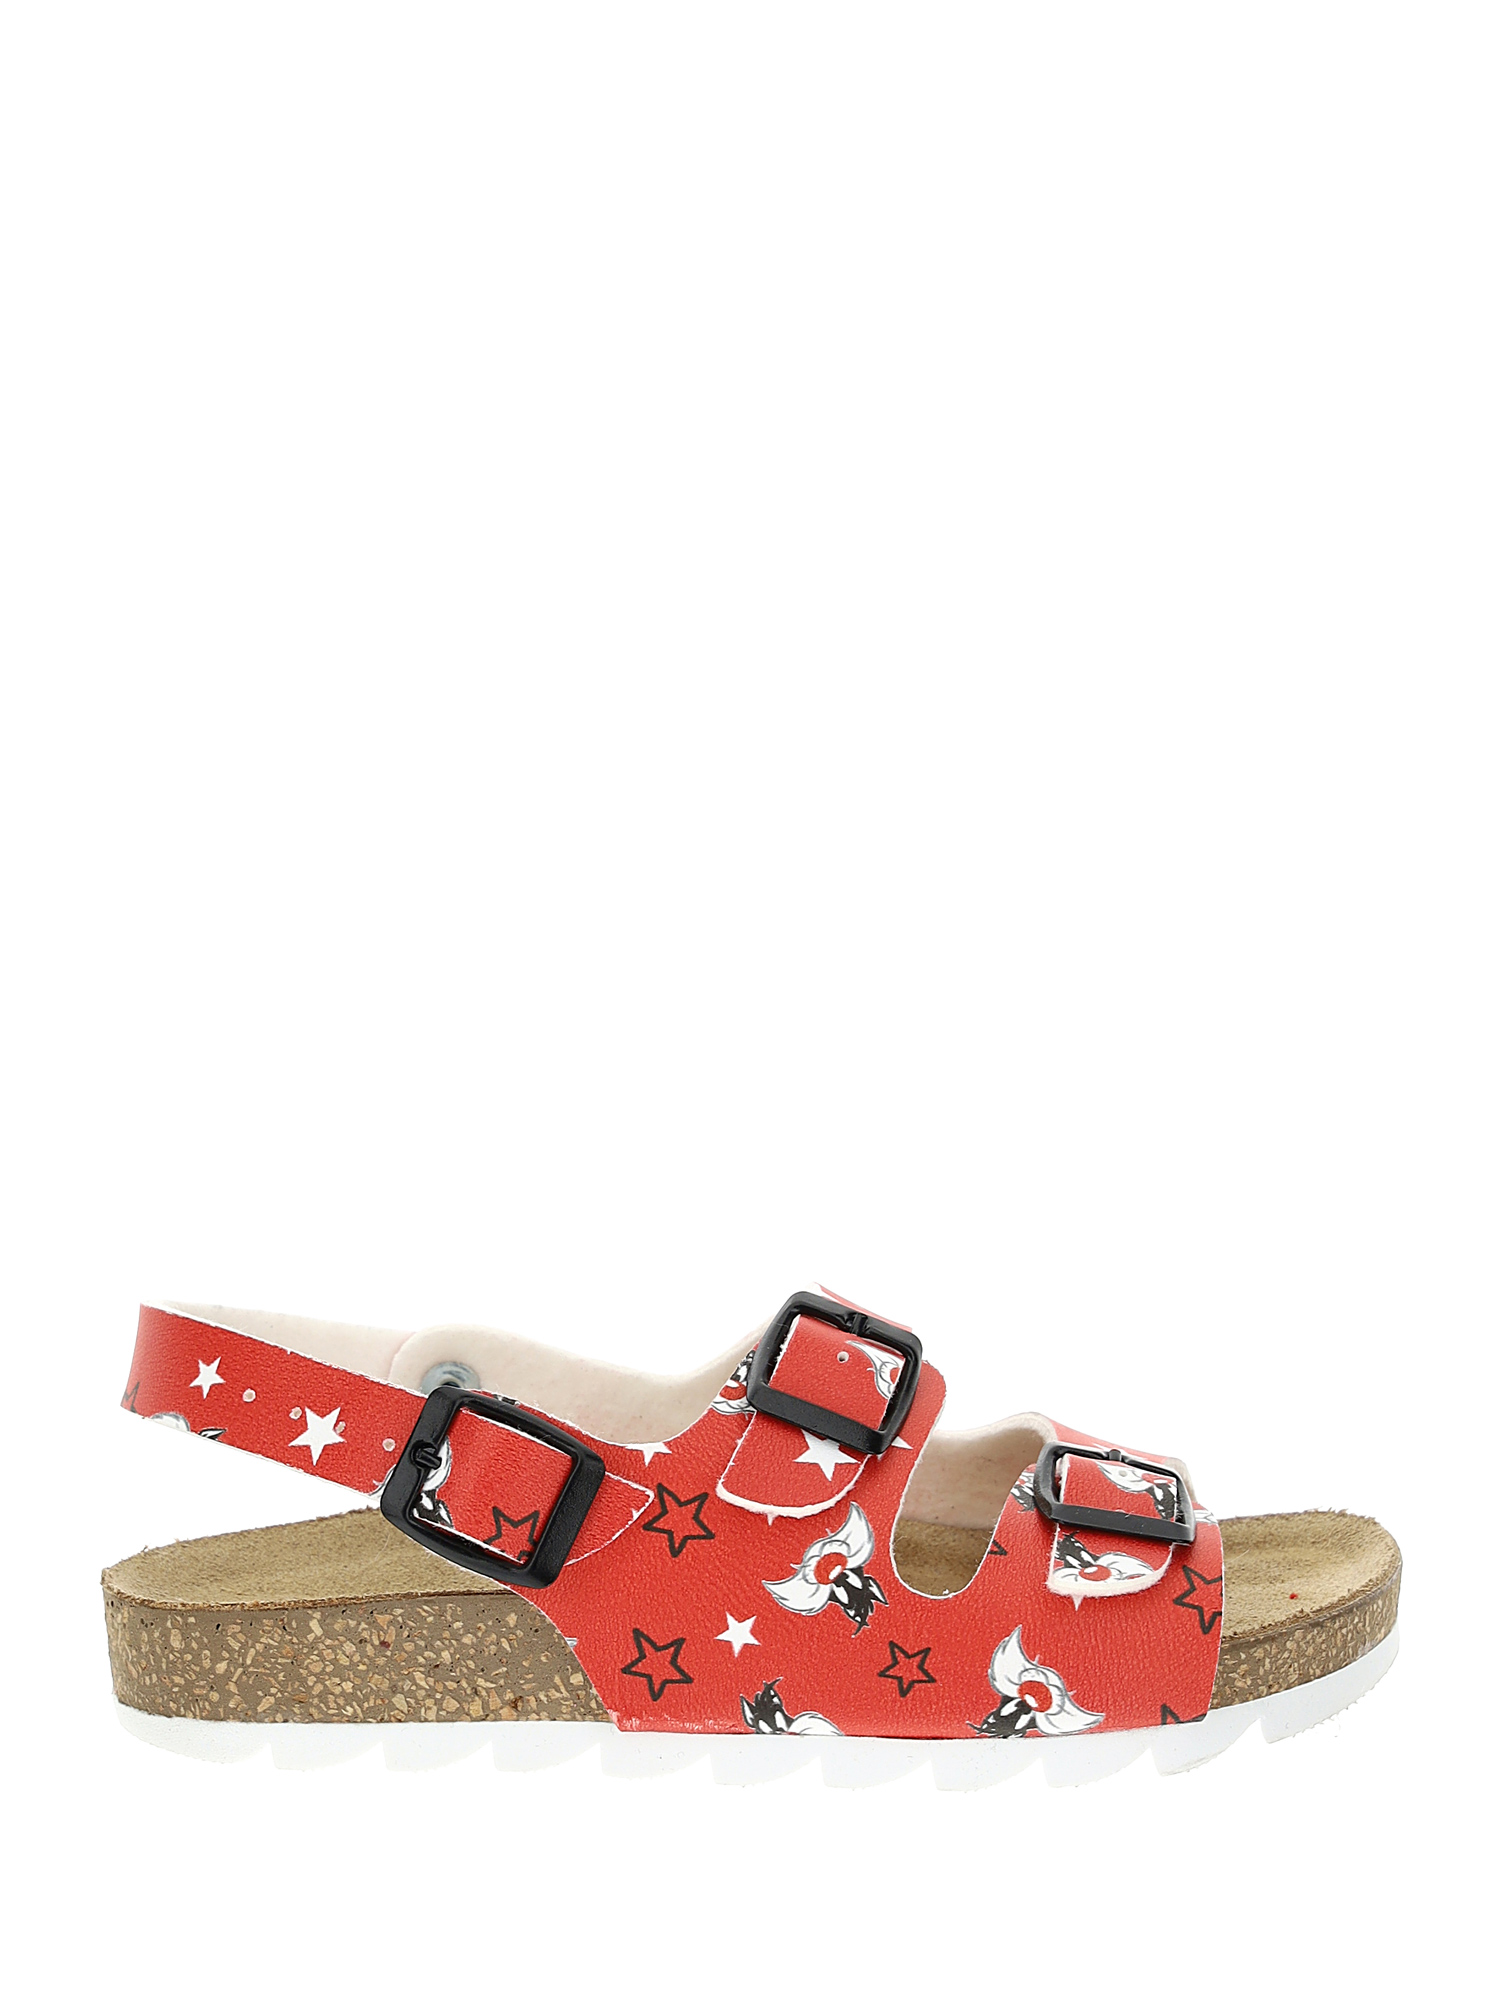 Monnalisa Sylvester Coated Fabric Sandals In Black + Red